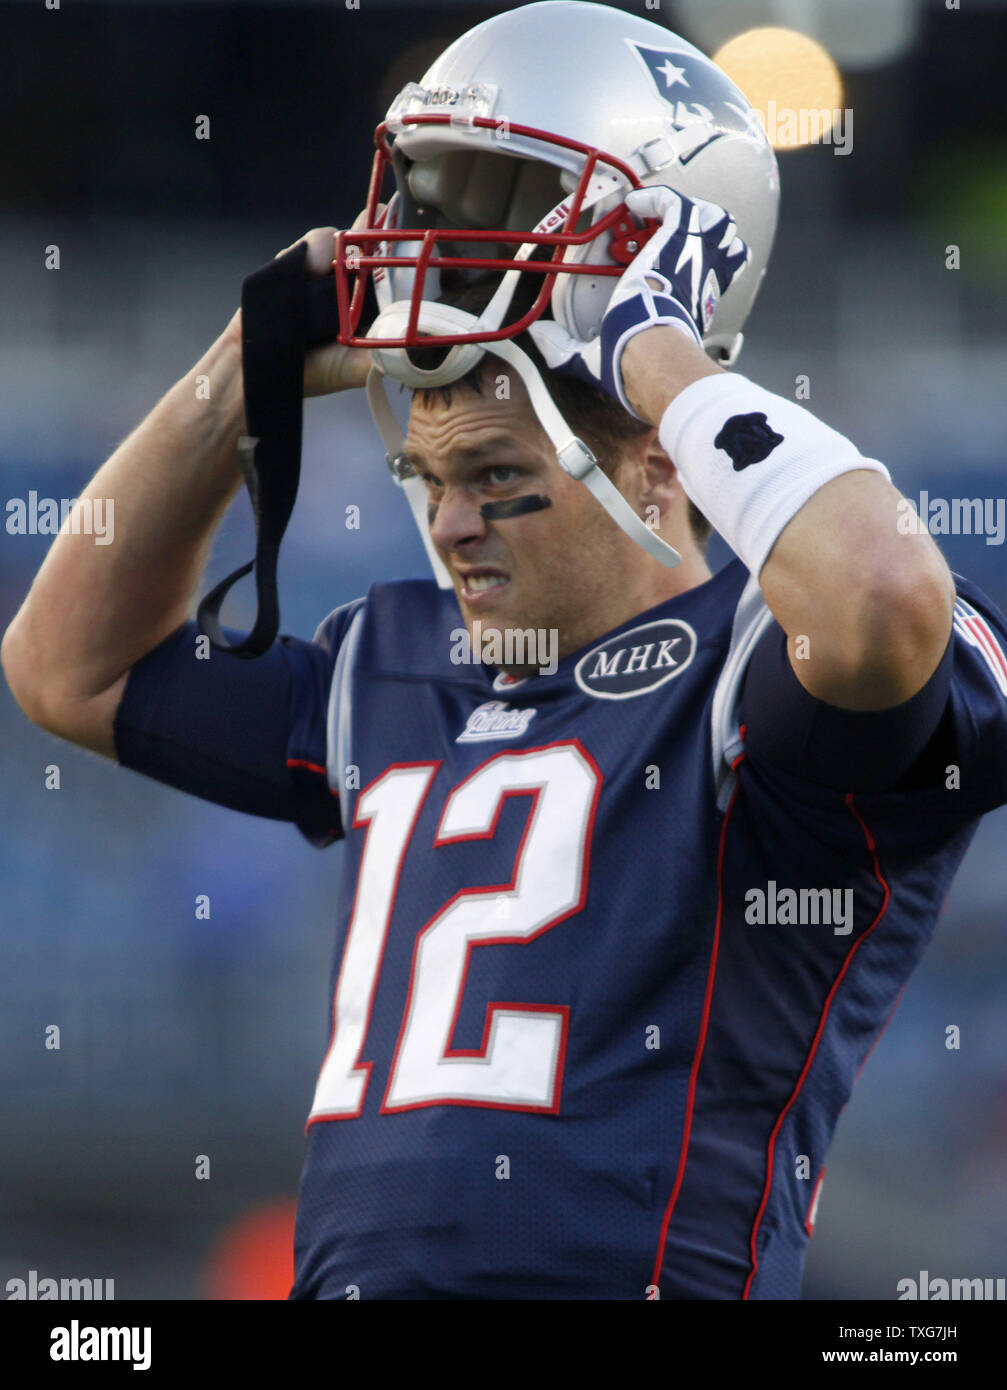 New England Patriots quarterback Tom Brady puts on his helmet while warming up with his team before taking on the New York Giants at Gillette Stadium in Foxboro, Massachusetts on November 6, 2011.    UPI/Matthew Healey Stock Photo